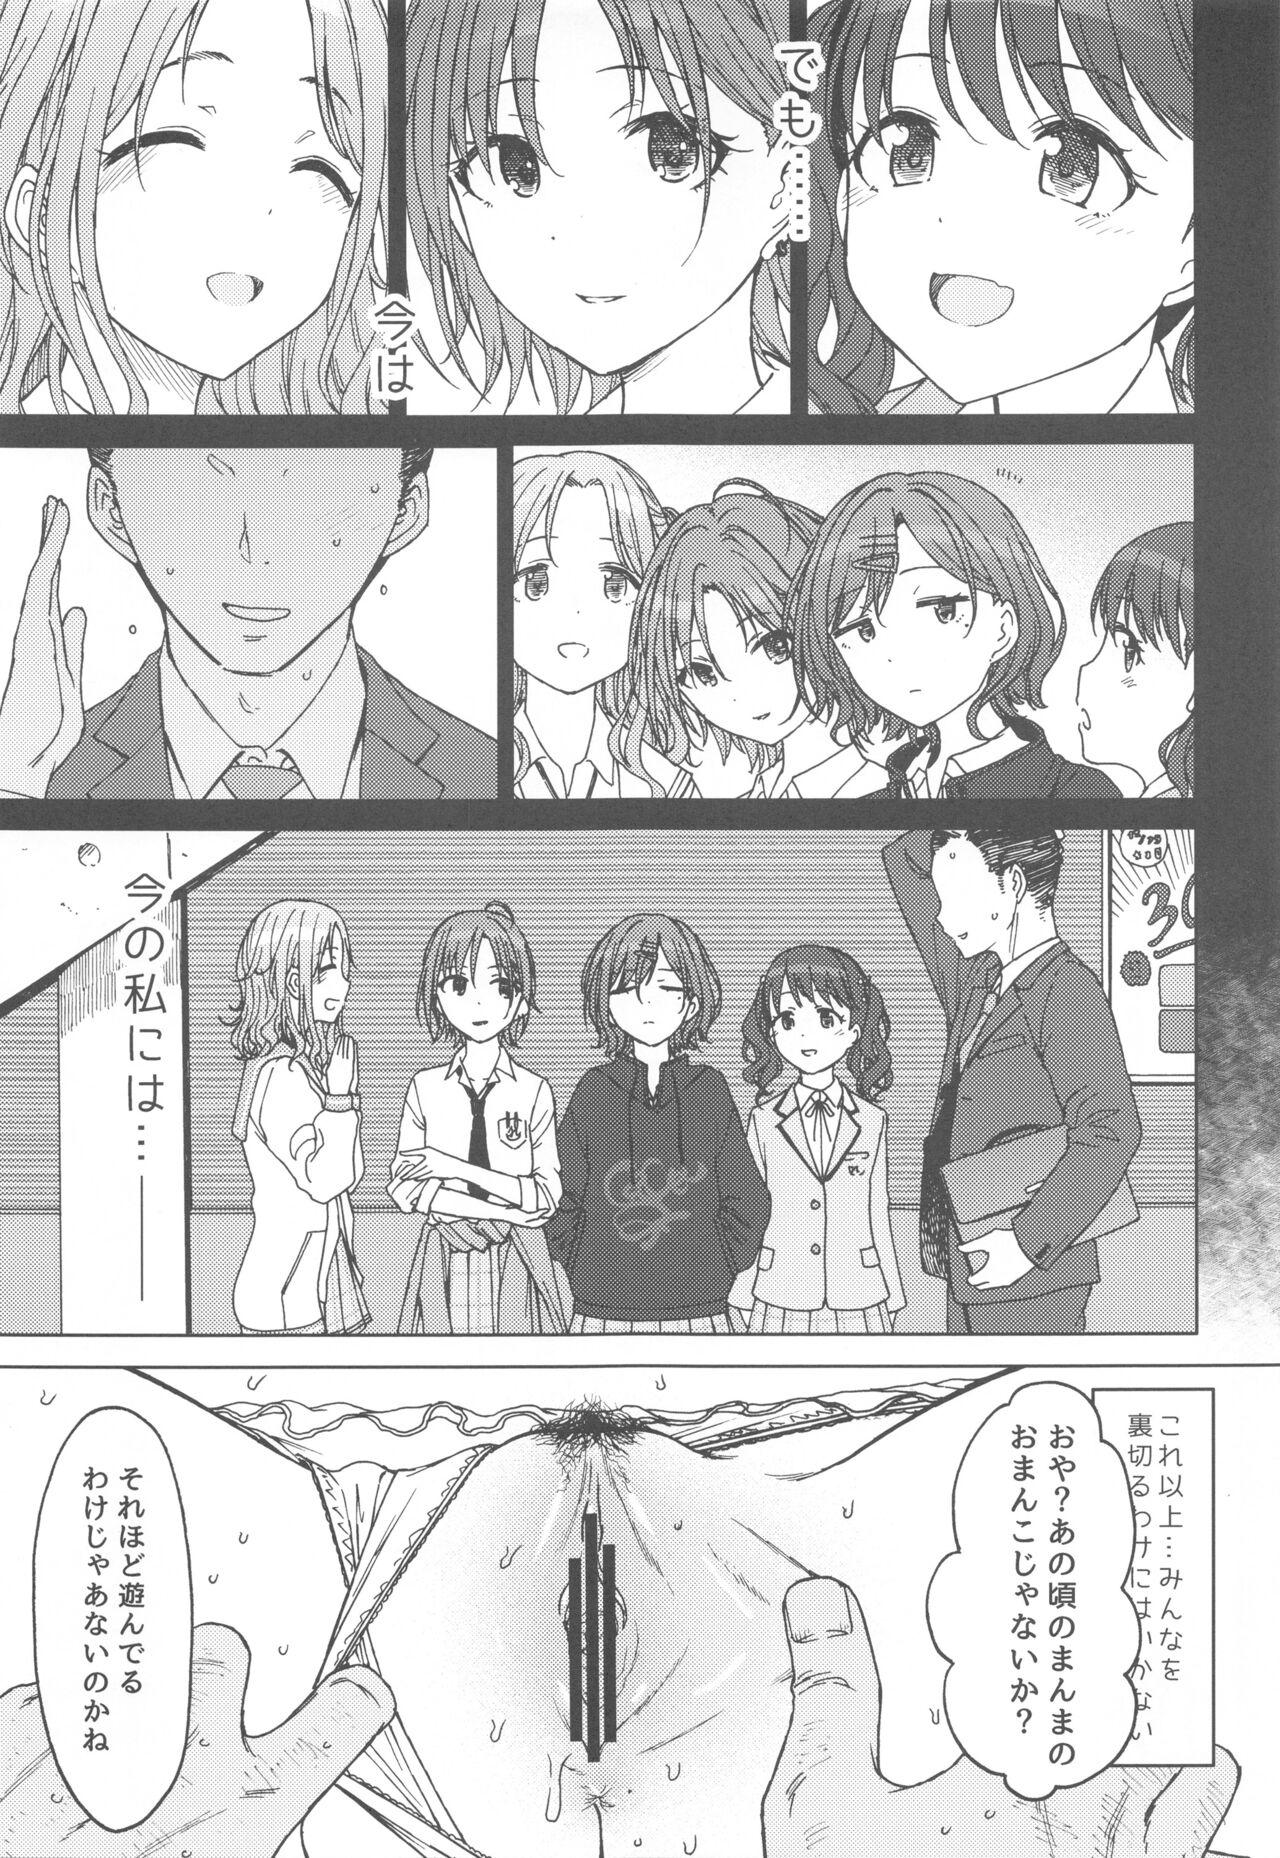 Action REMIND ME - The idolmaster Inked - Page 10